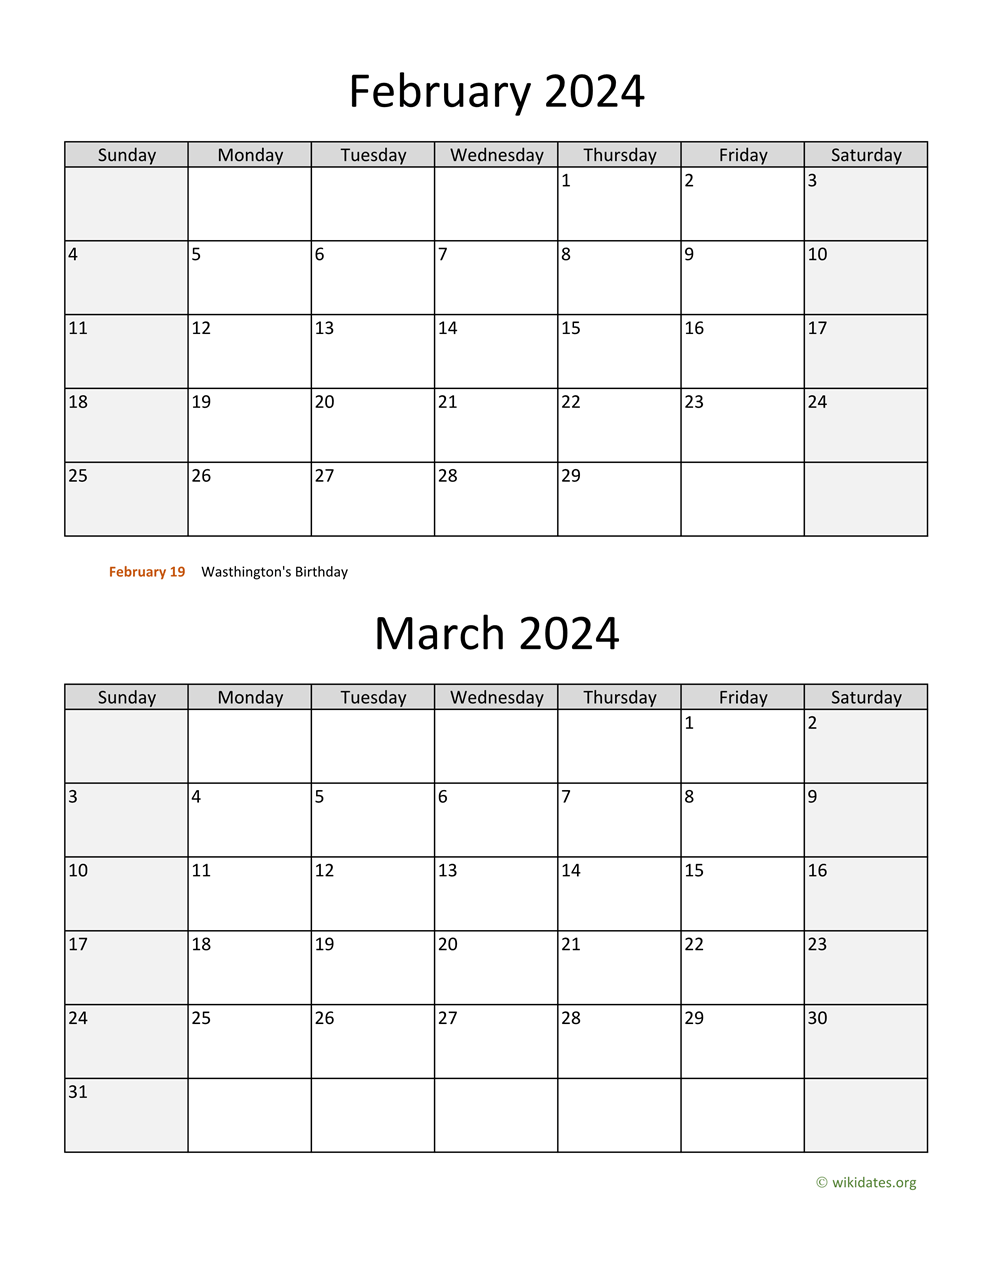 February And March 2024 Calendar | Wikidates for Printable Calendar February March 2024